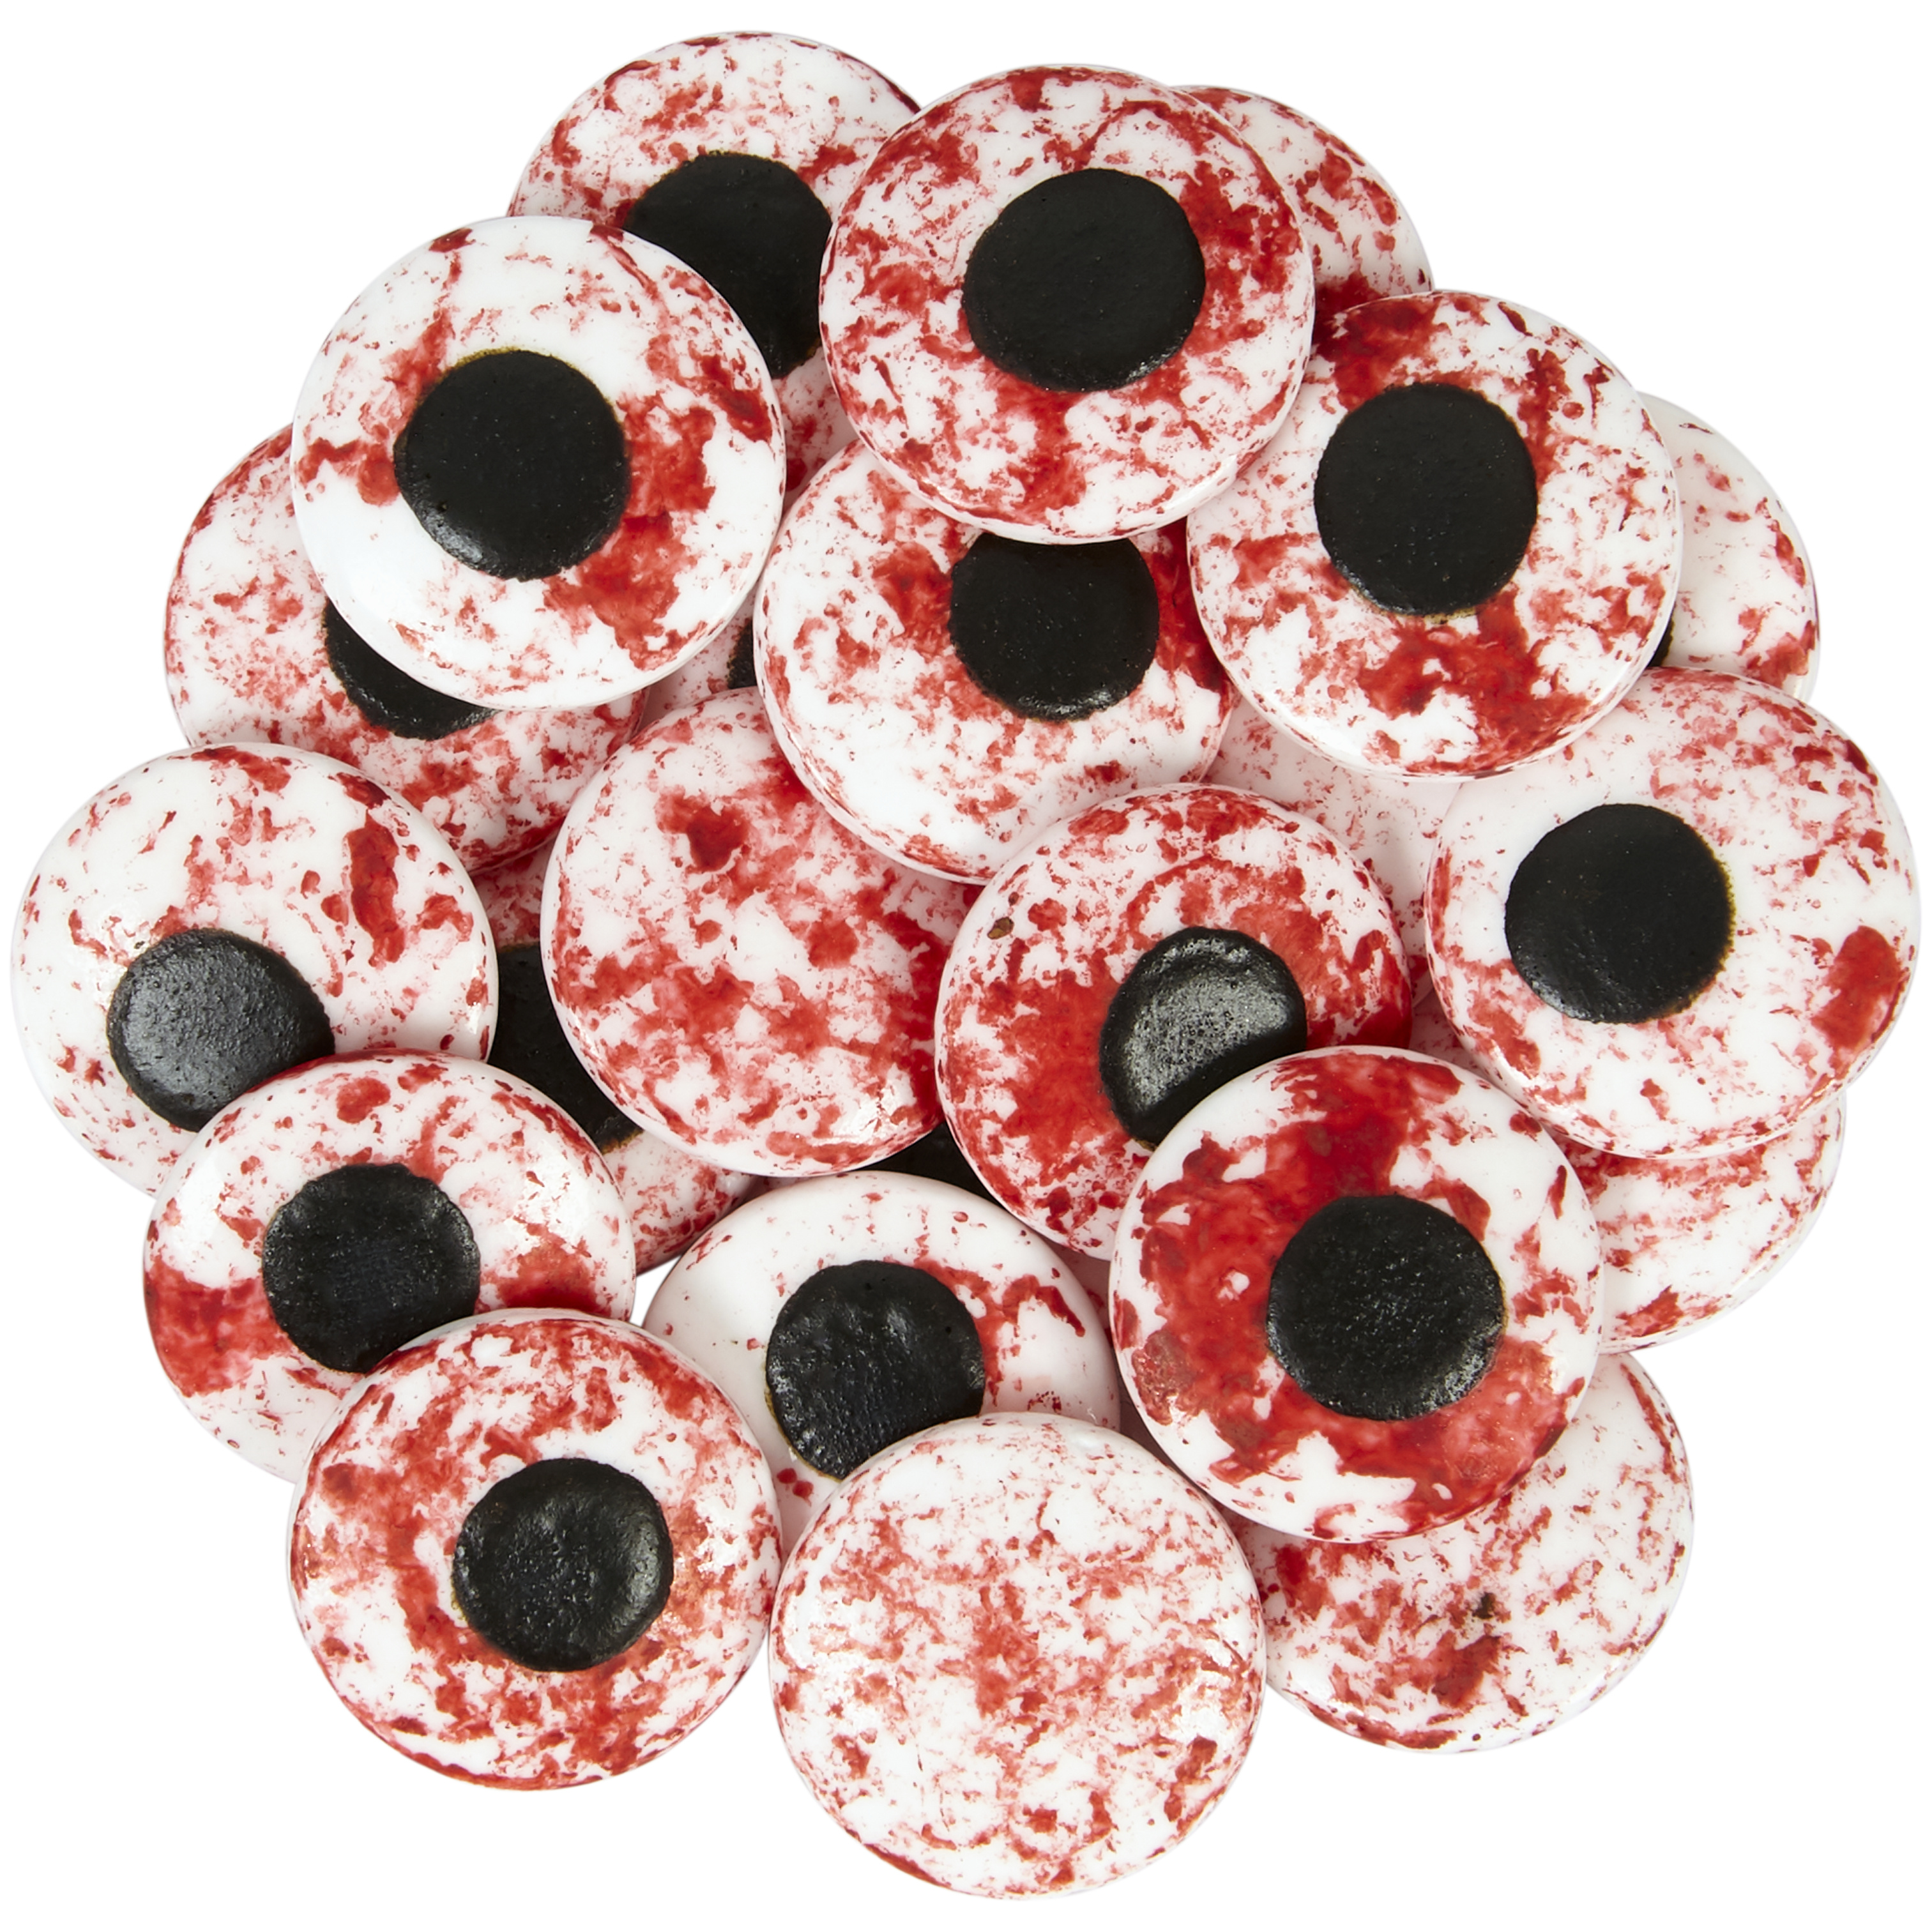 Wilton Red Vein Candy Eyeballs, Edible Candies for Icing Decorating, 1 oz.,  0.72 in. Diameter 